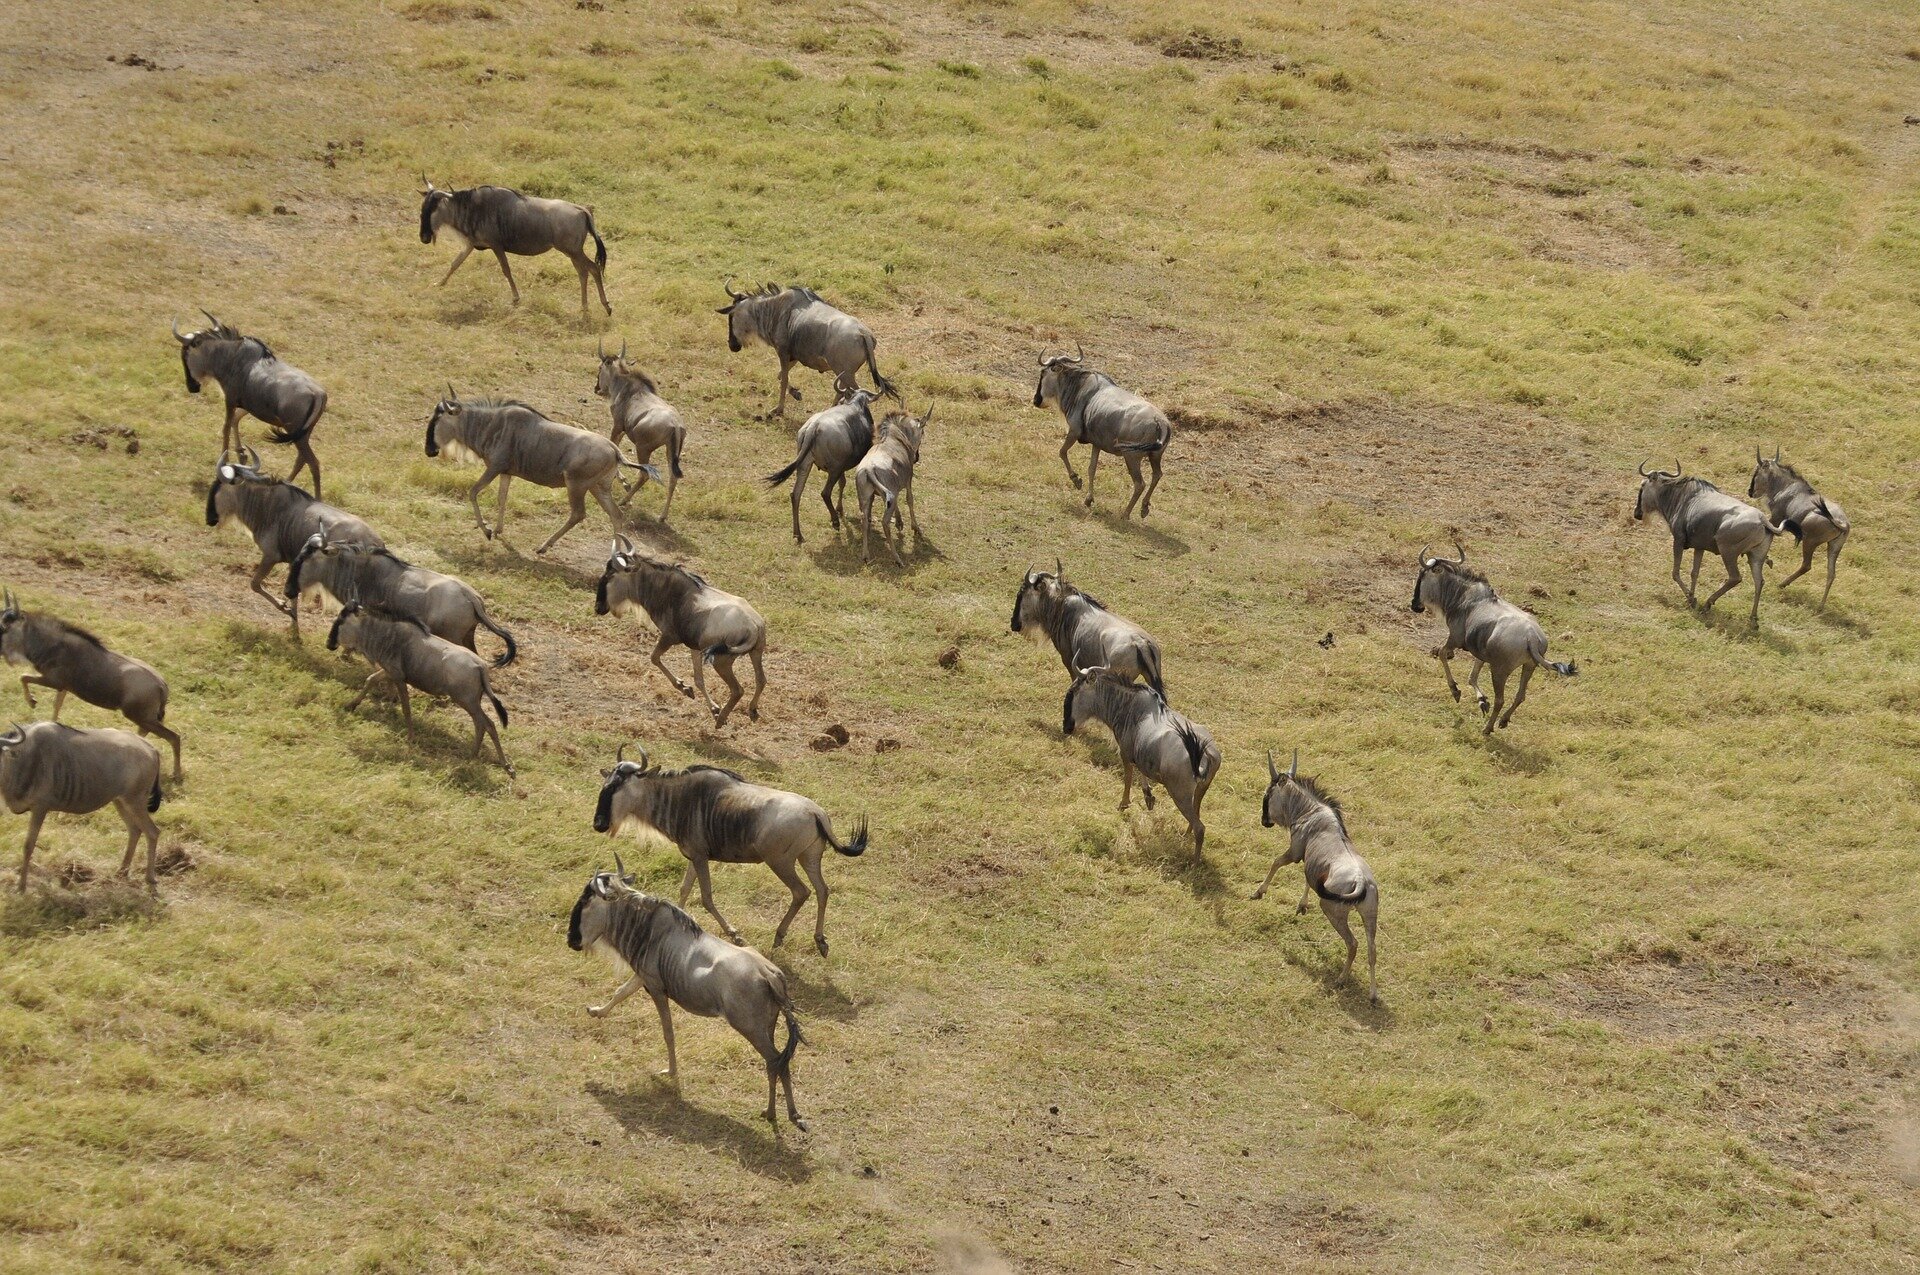 New technologies could help conservationists keep better track of Serengeti wildebeest herds